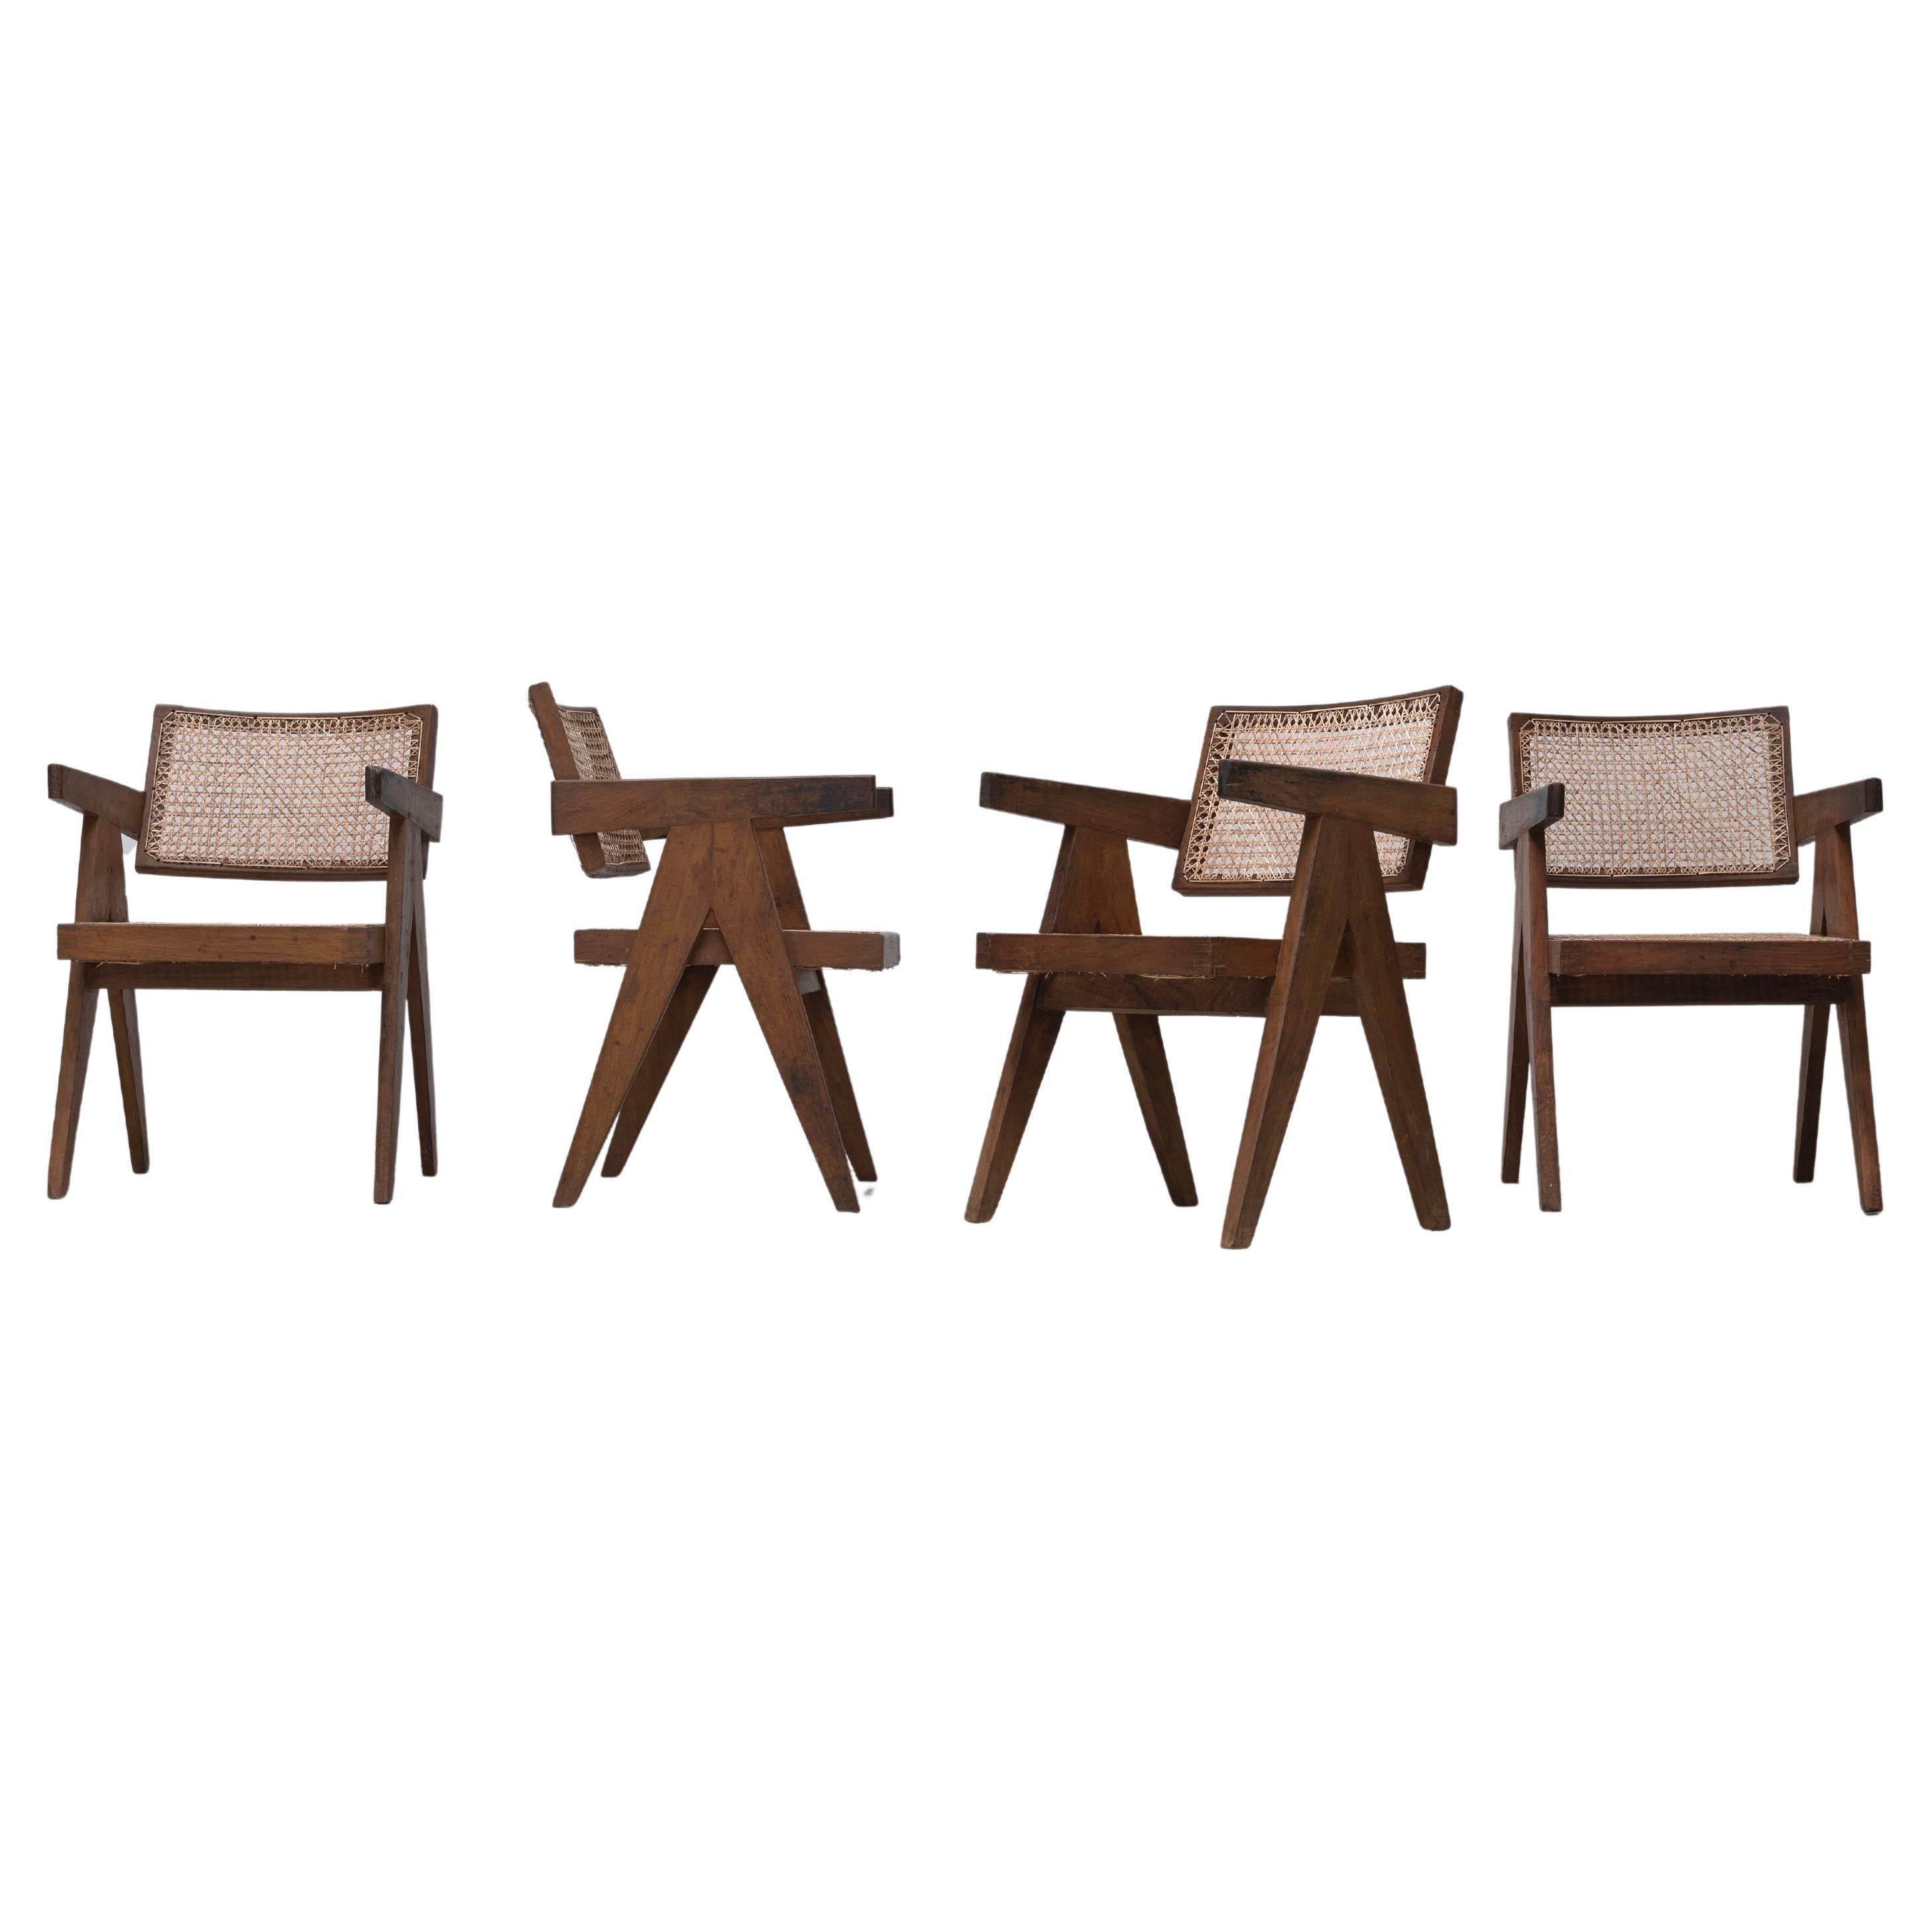 Pierre Jeanneret , Office Chair for Chandigarh, Teak , 1950s , Set of 4 For Sale